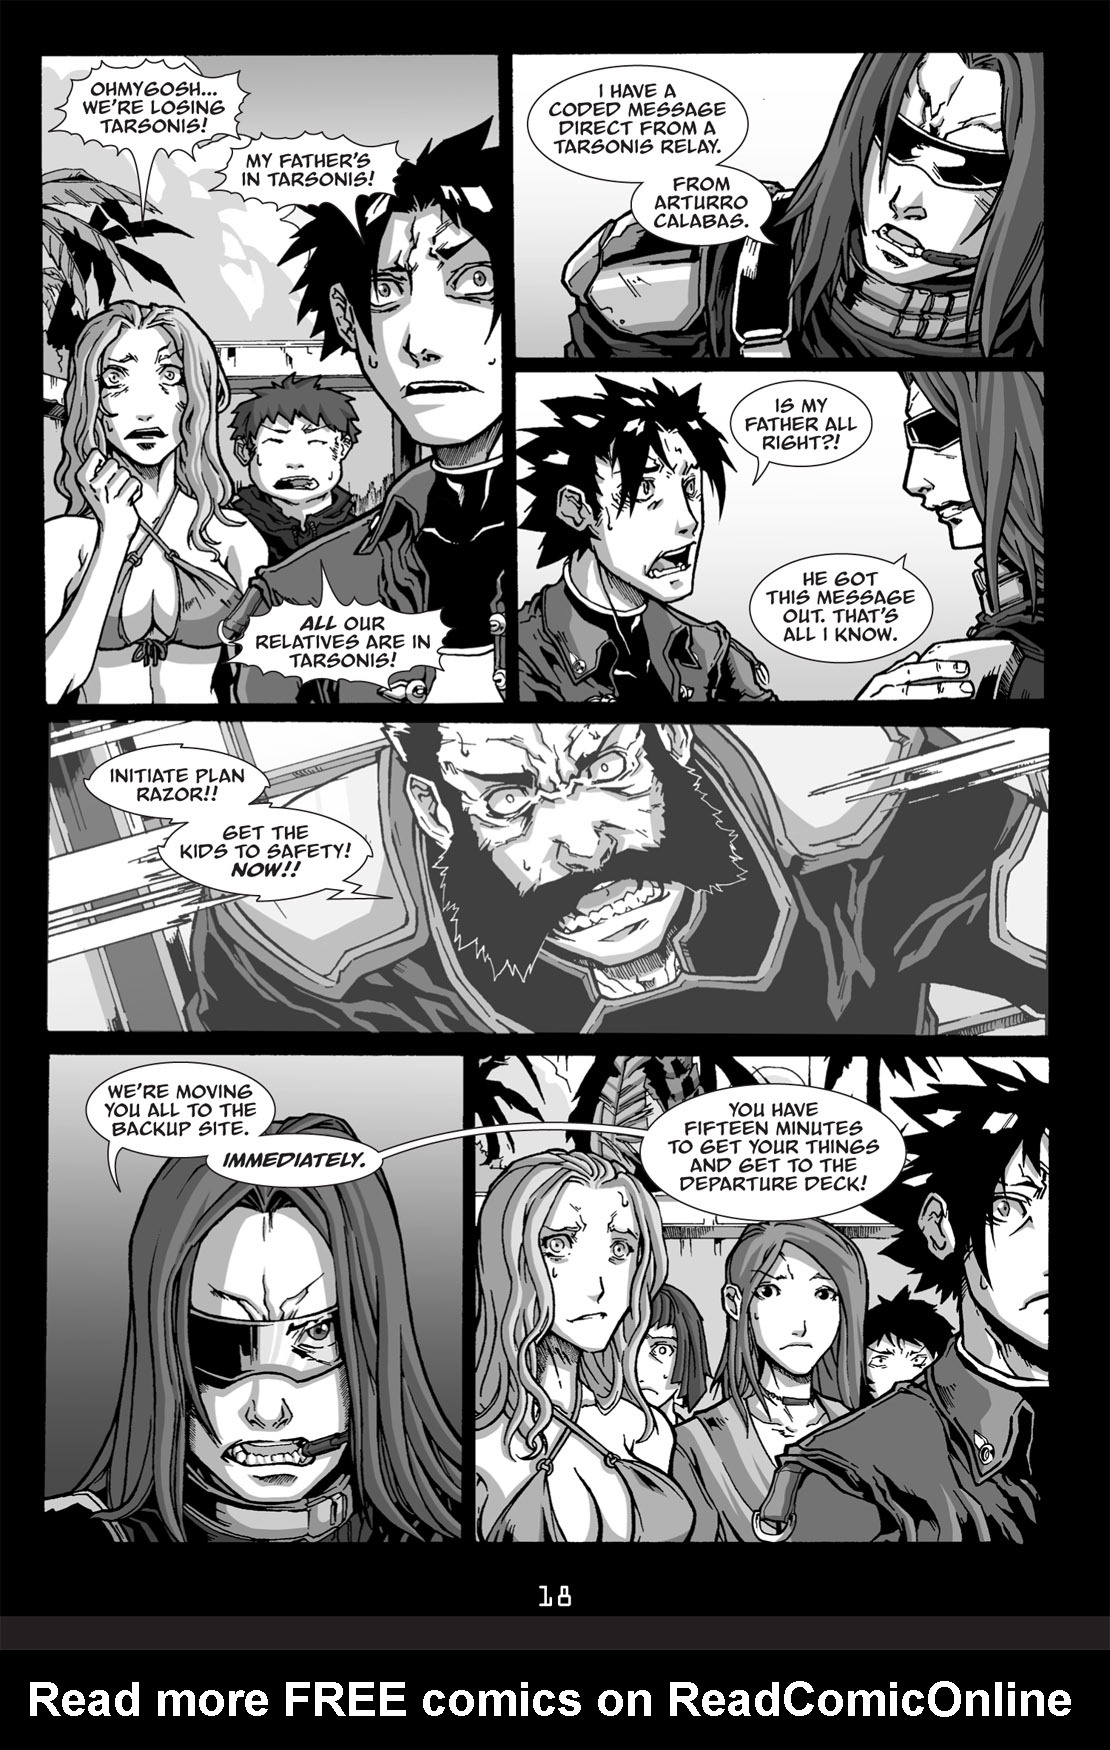 Read online StarCraft: Ghost Academy comic -  Issue # TPB 2 - 19